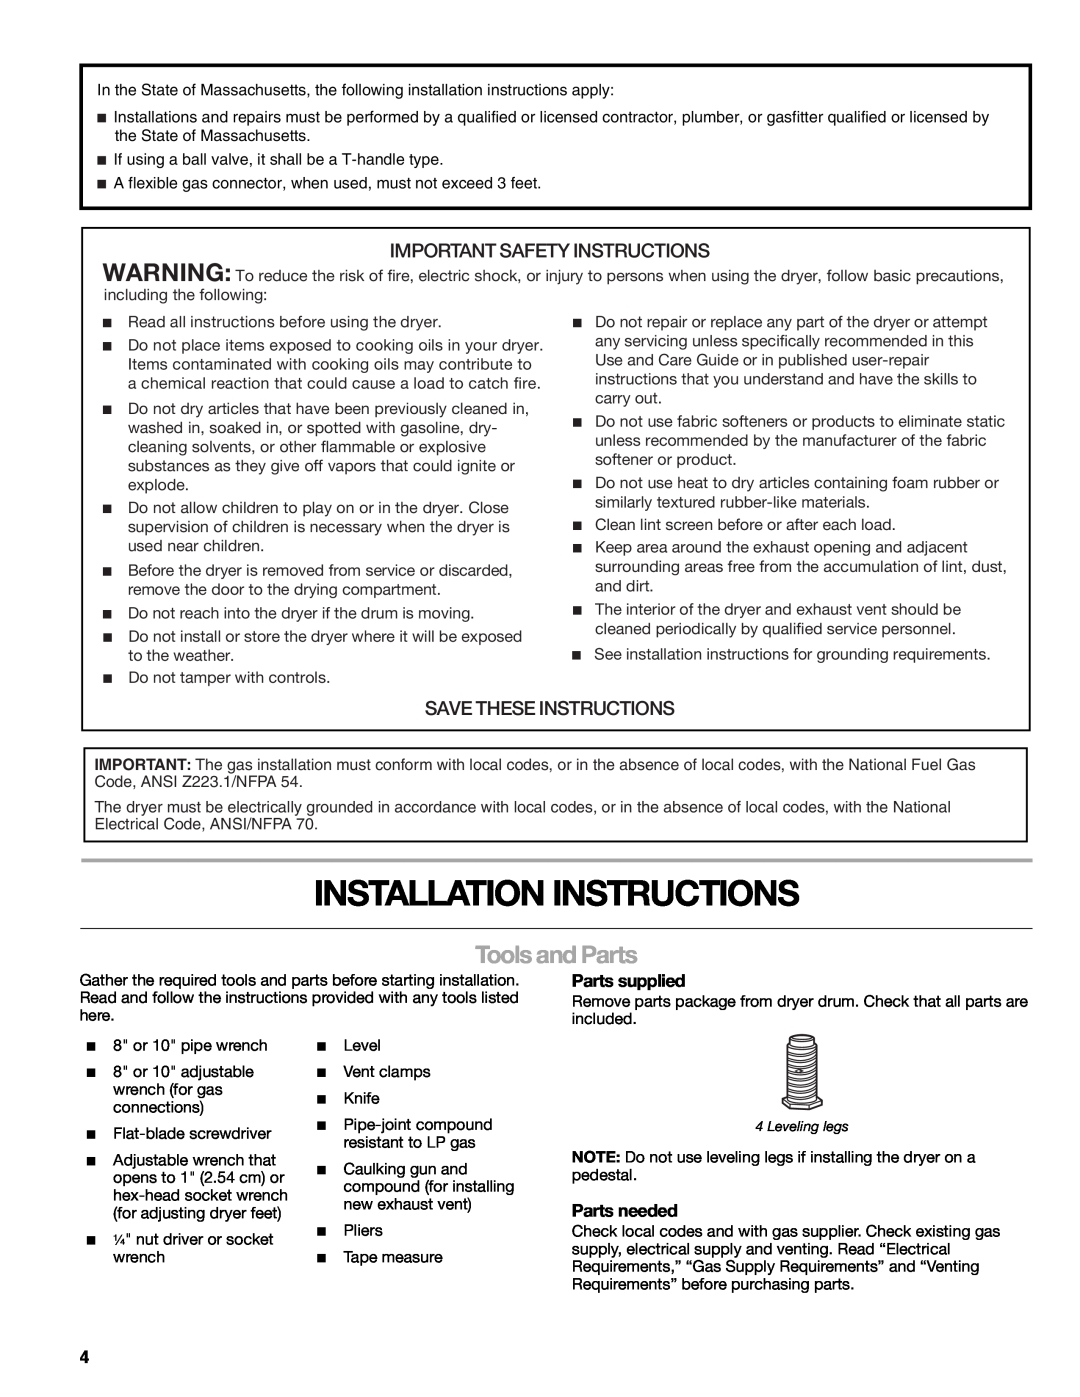 Sears 9709, 110.9708 Installation Instructions, Tools and Parts, Important Safety Instructions, Save These Instructions 